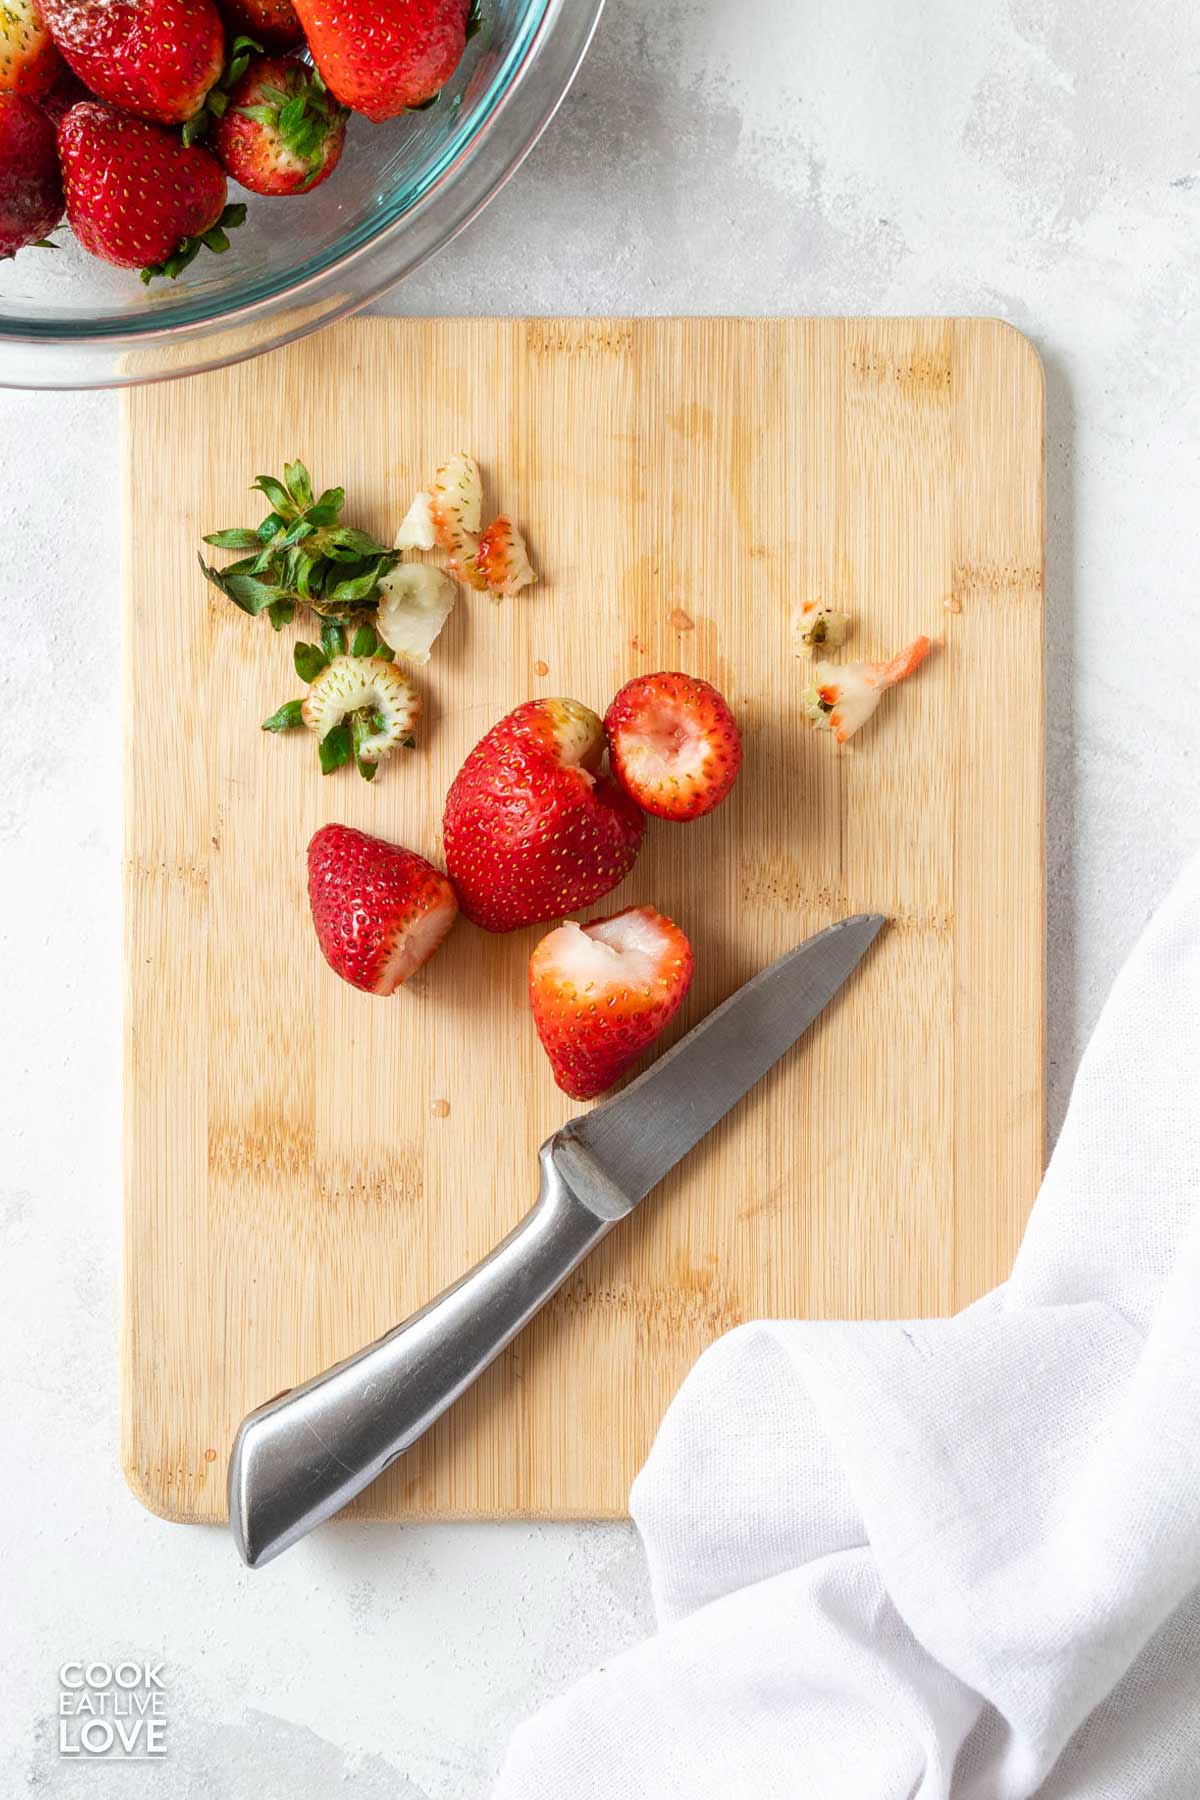 Core cut out of strawberries with a paring knife.